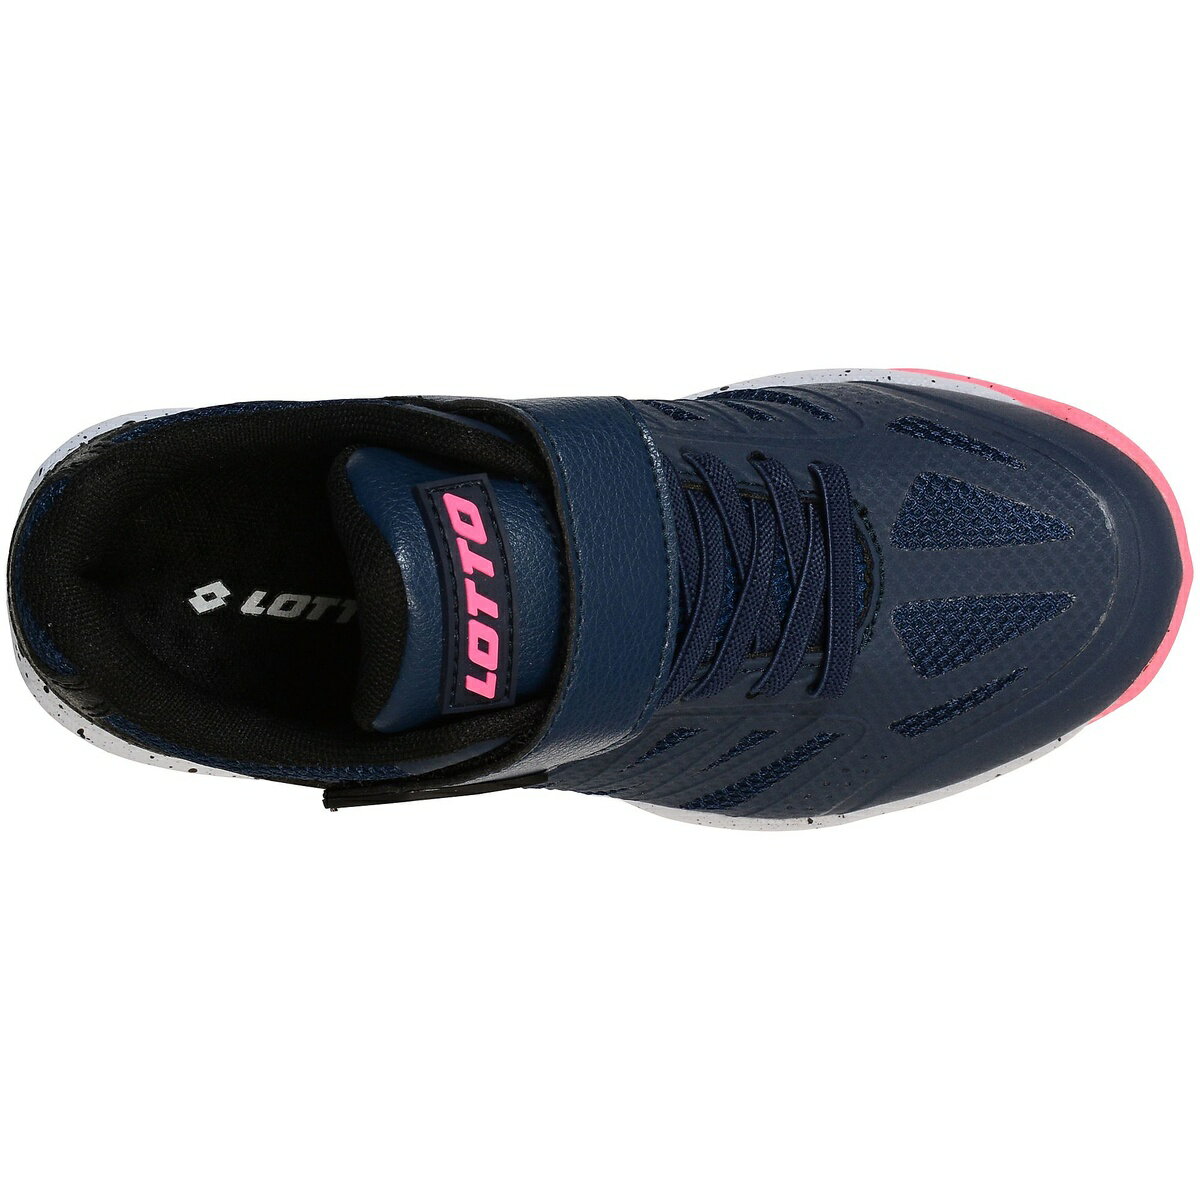 LOTTO (ロット) LOTTOジュニアテニスシューズ オールコート ジュニアテニスシューズ ジュニア NAVY/PINK LO-Y20-004-031